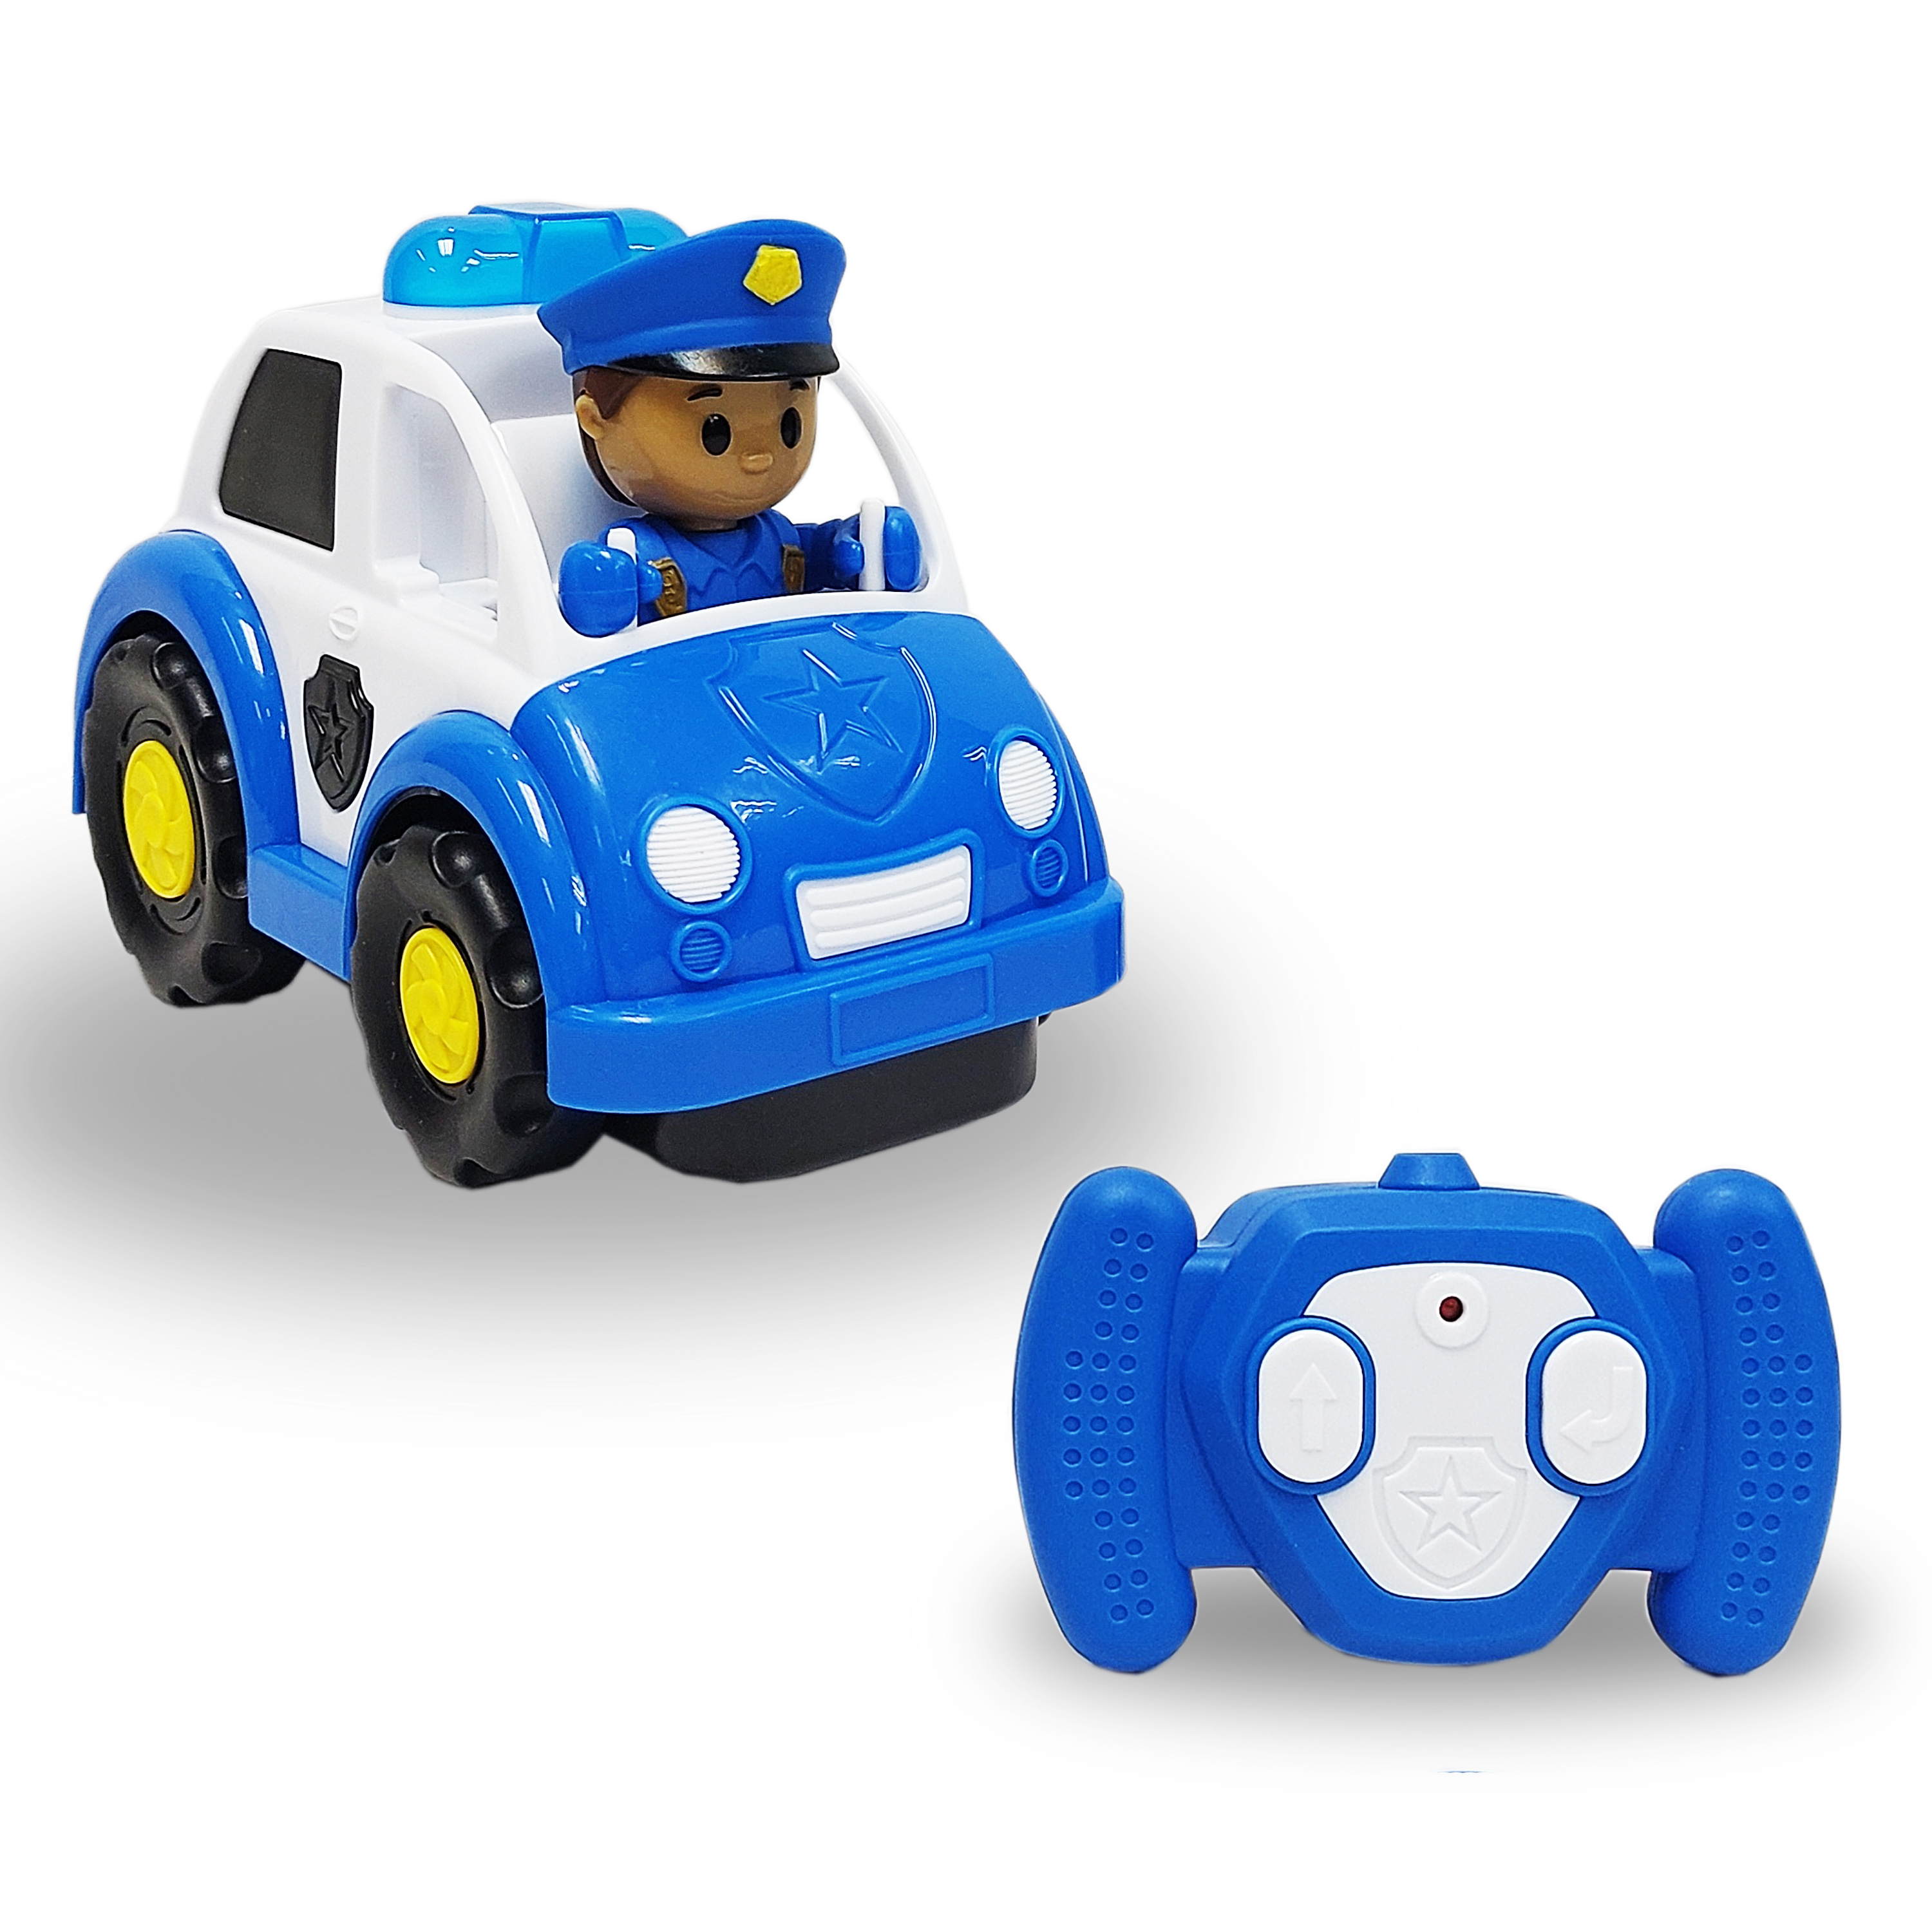 Kid Connection RC Police Car with Lights and Police Officer Figure, 2.4G, Ages 3+ - image 5 of 6